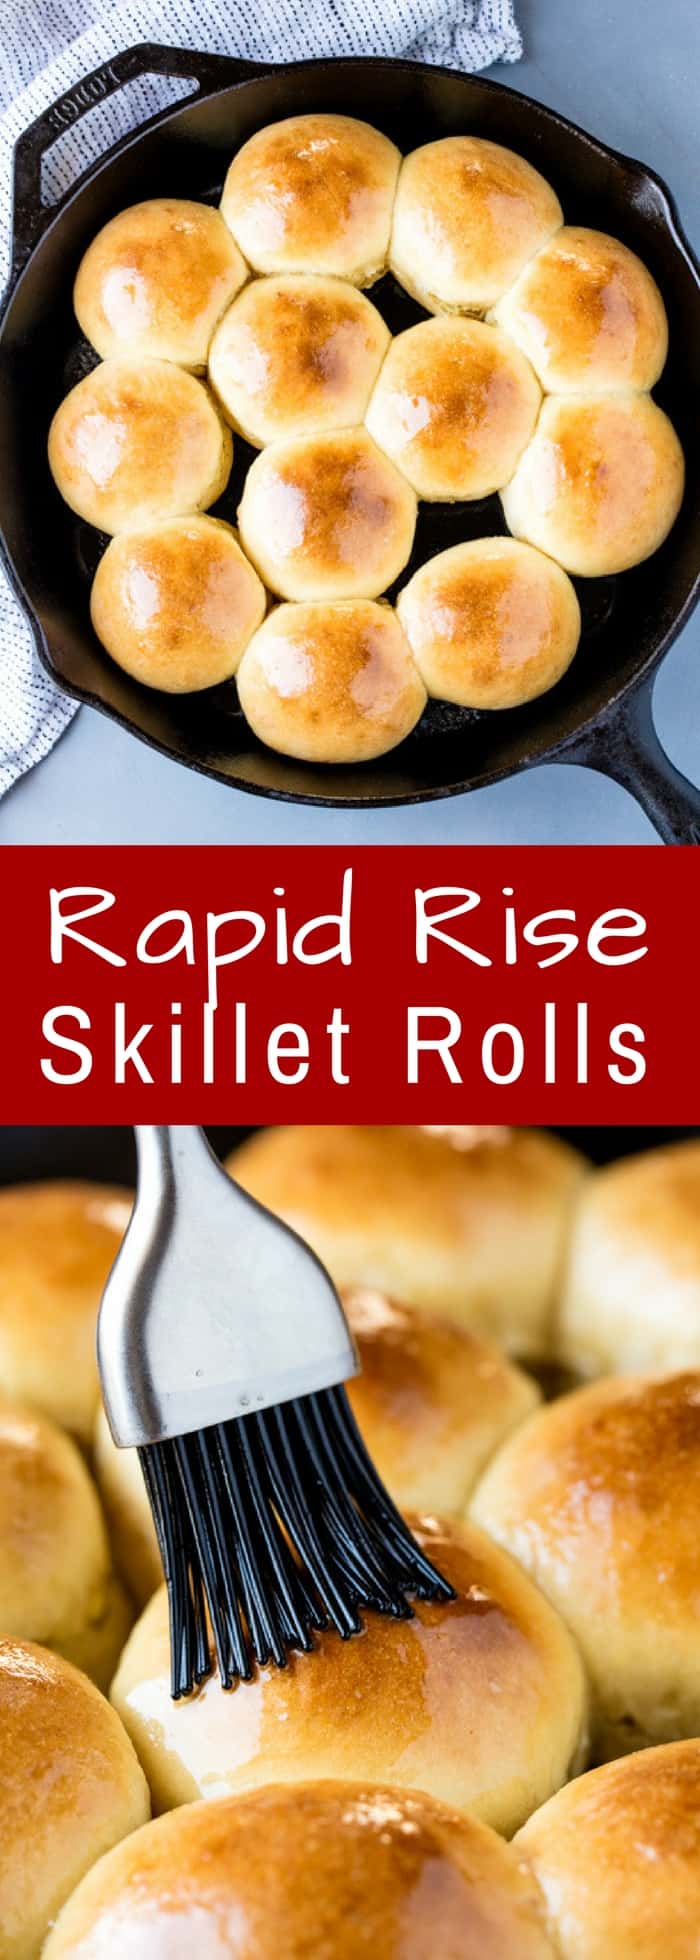 Rapid Rise Skillet Yeast Rolls will have homemade dinner rolls on your table in under 1 hour with absolutely not stand mixer required!